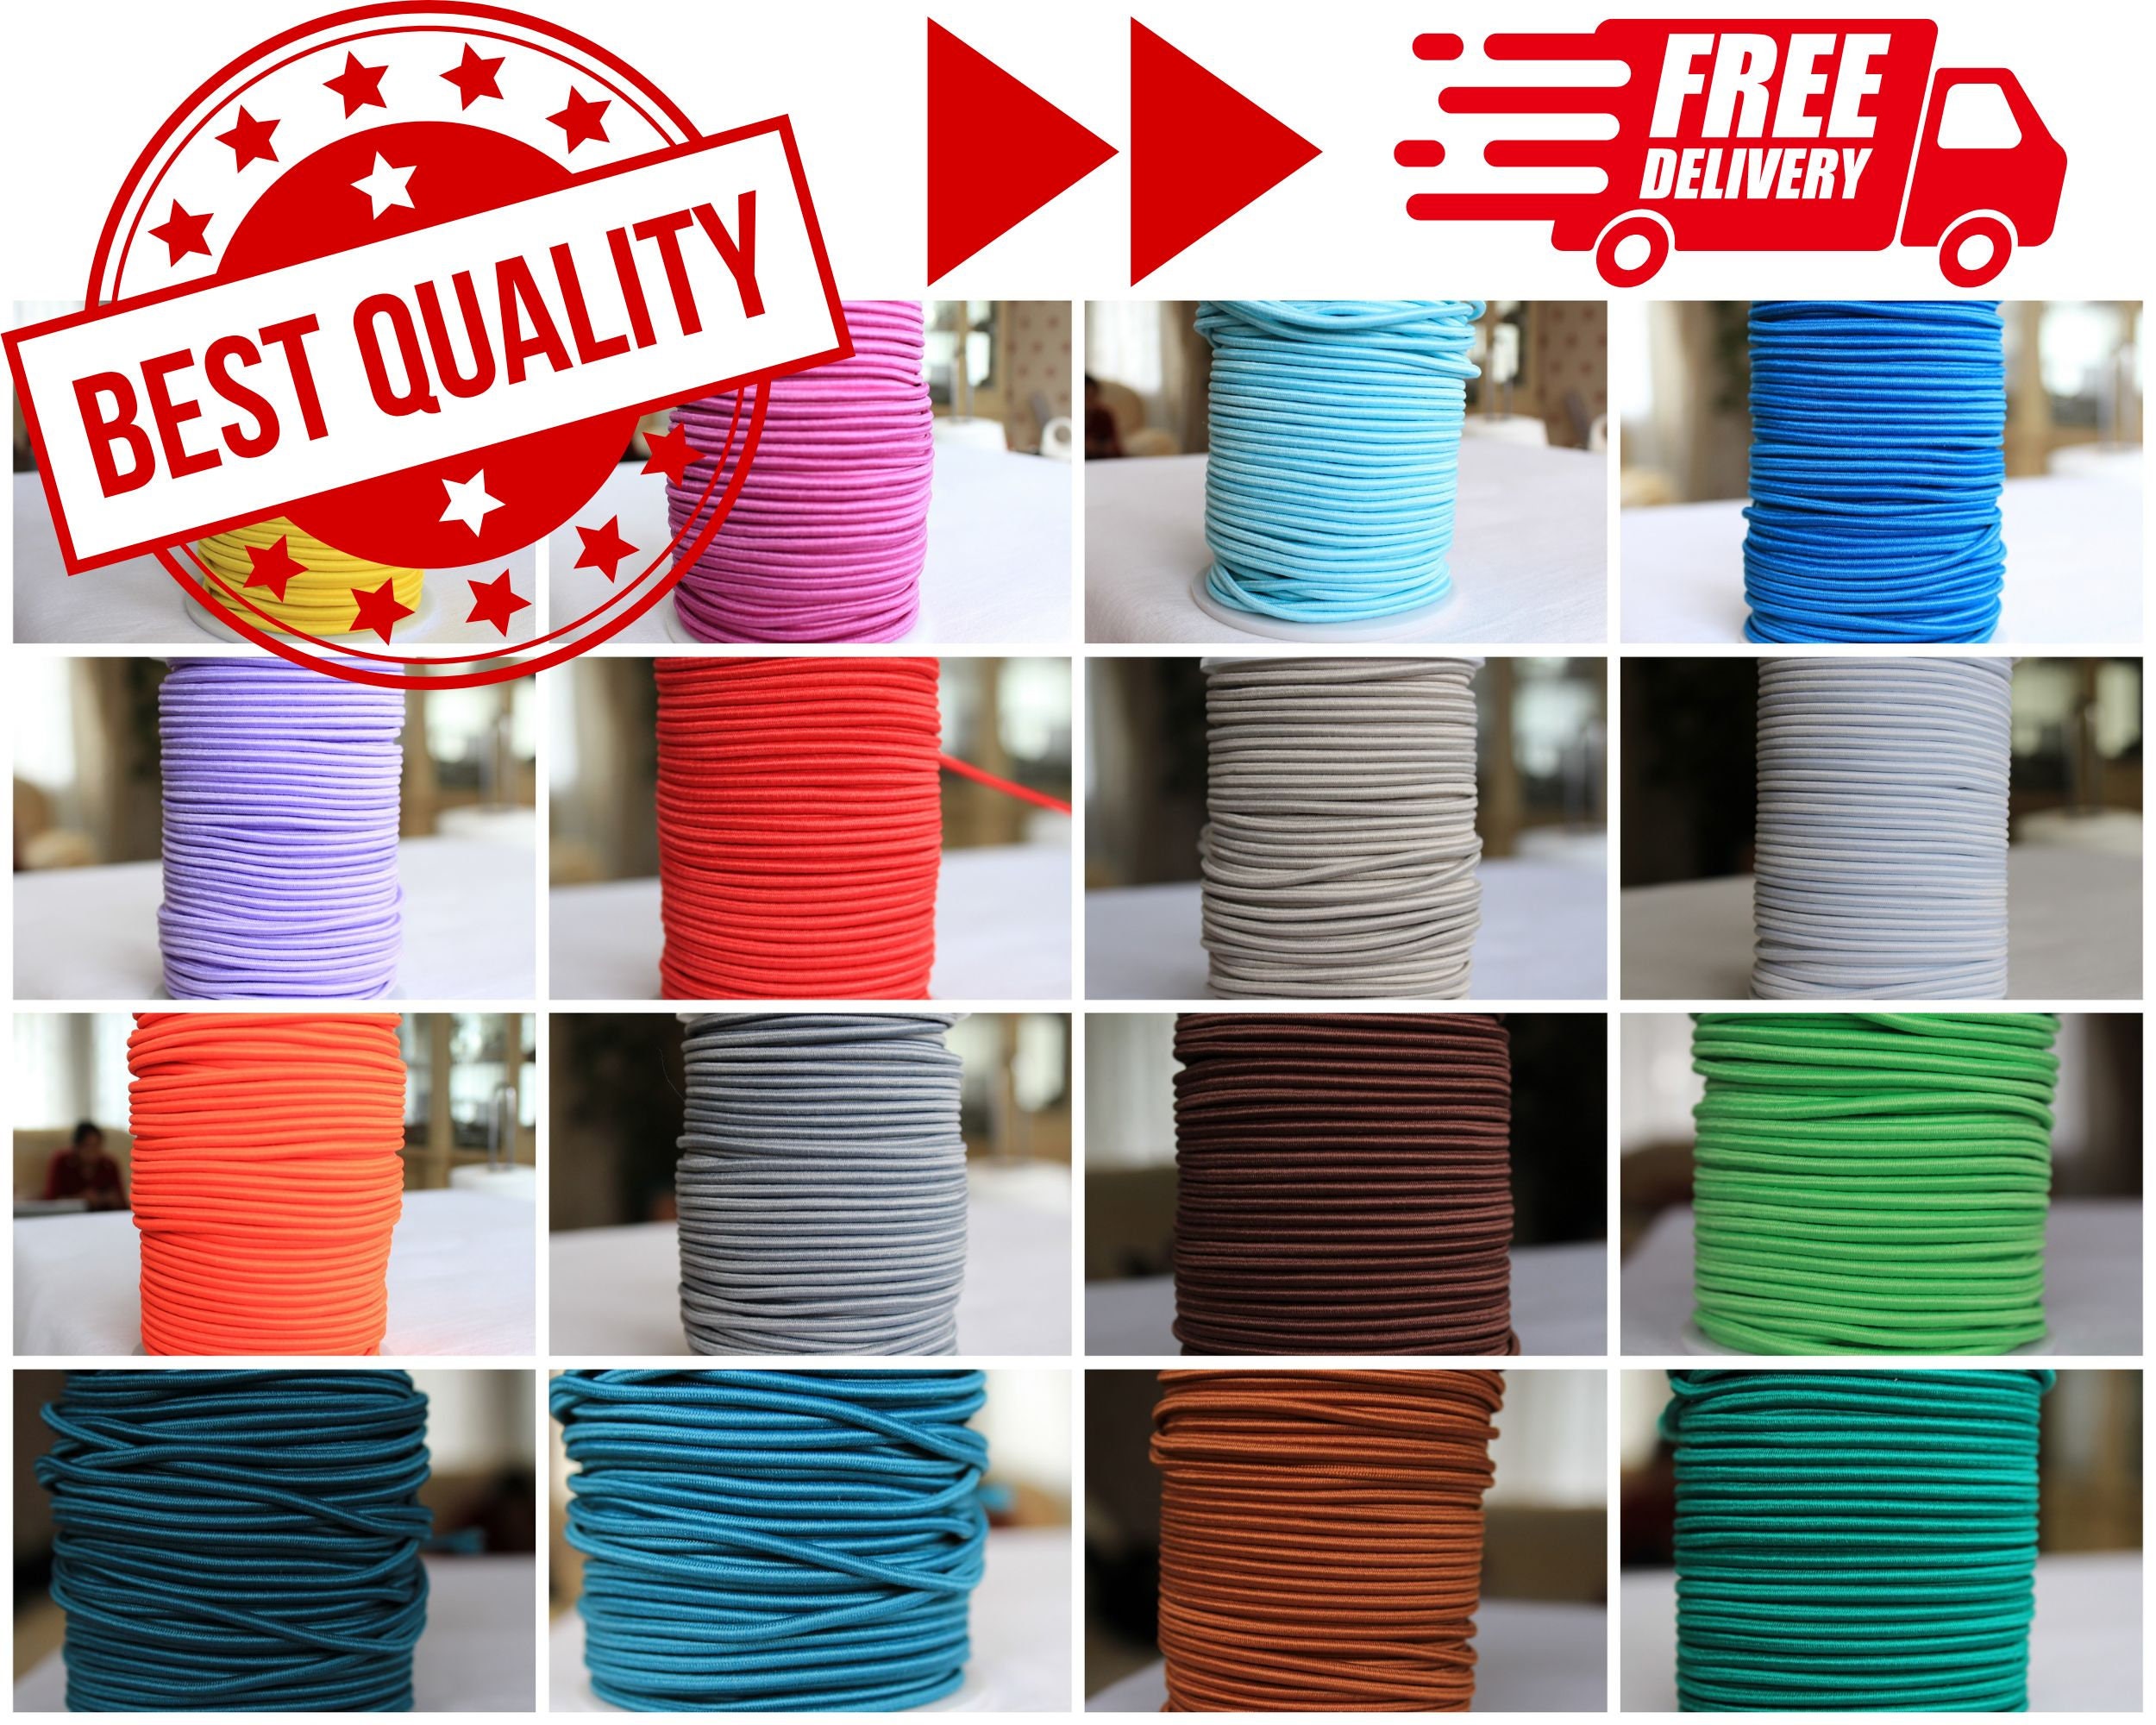 5 Metres of 2.5mm Shockcord Bungee Cord Elastic Strong Shock 